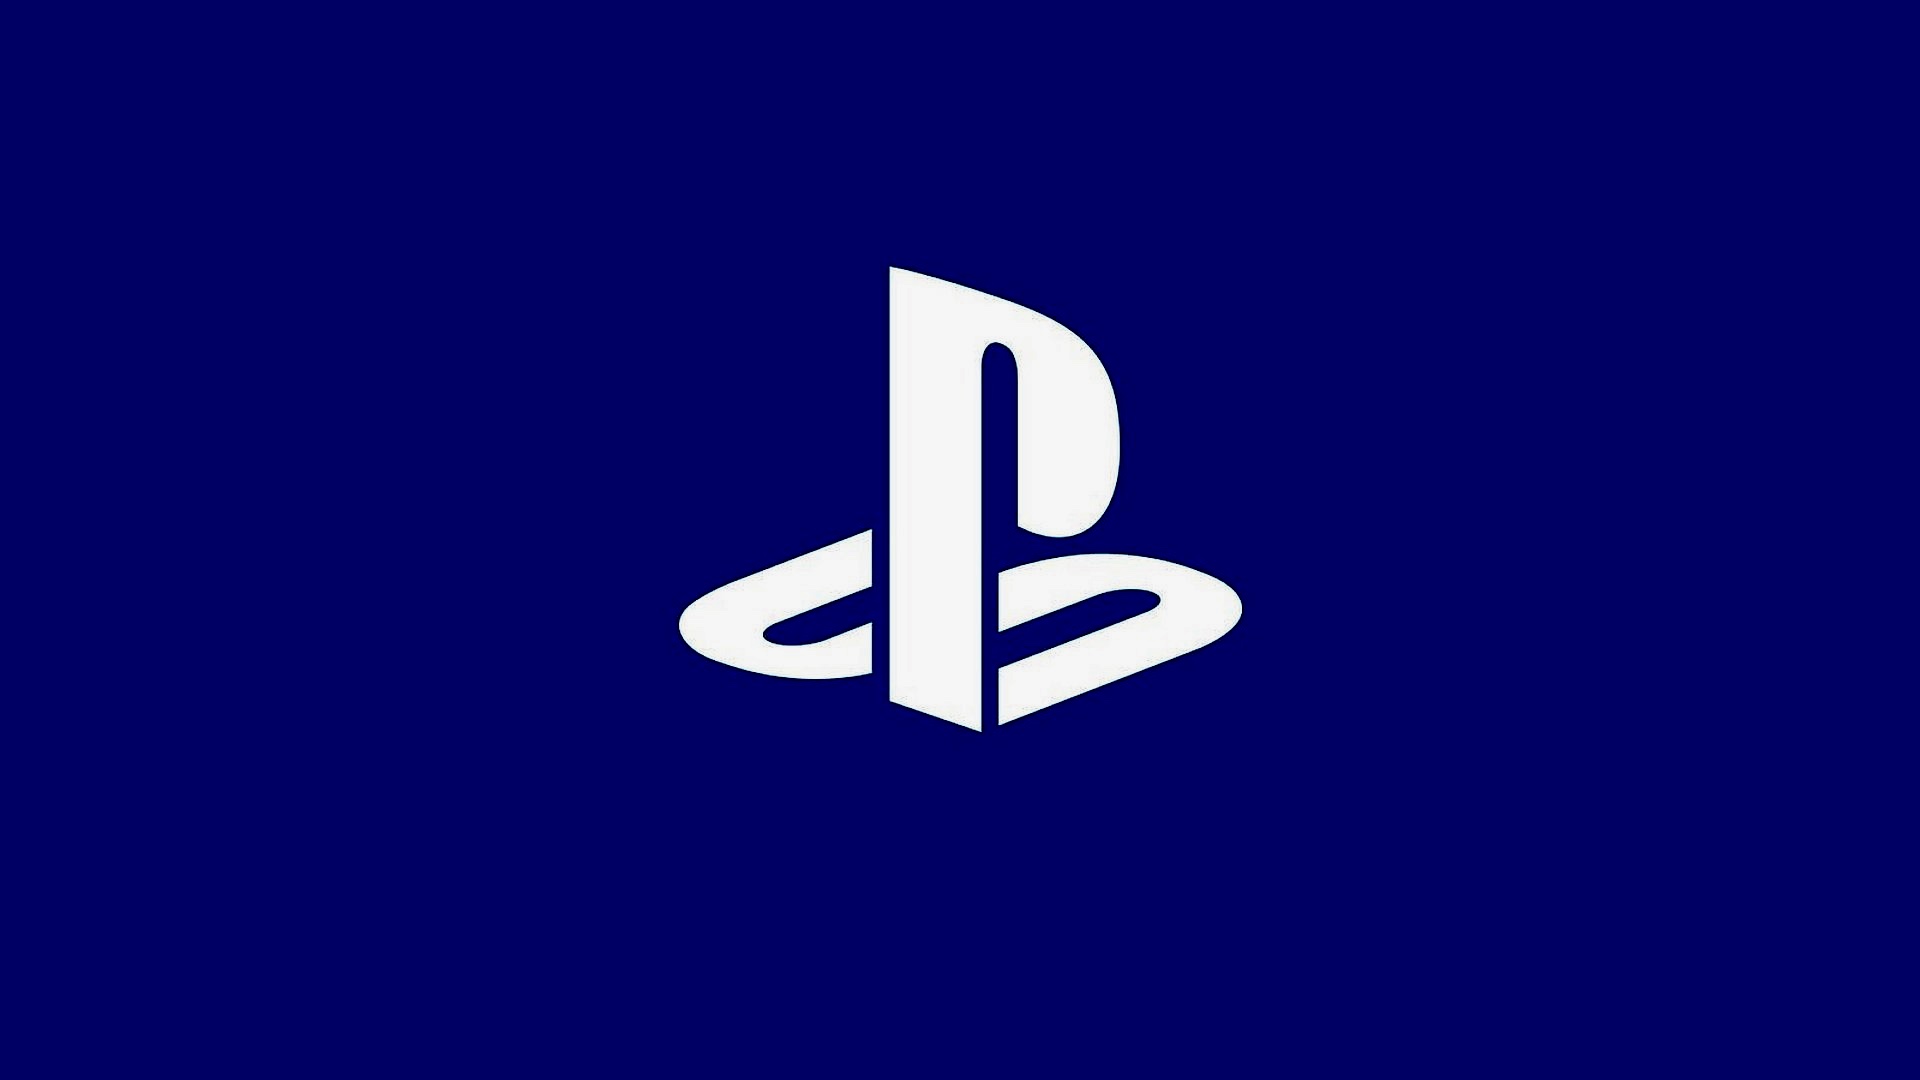 Sony Intends to Invest .13 Billion in R&D for Live Service Games This Fiscal Year